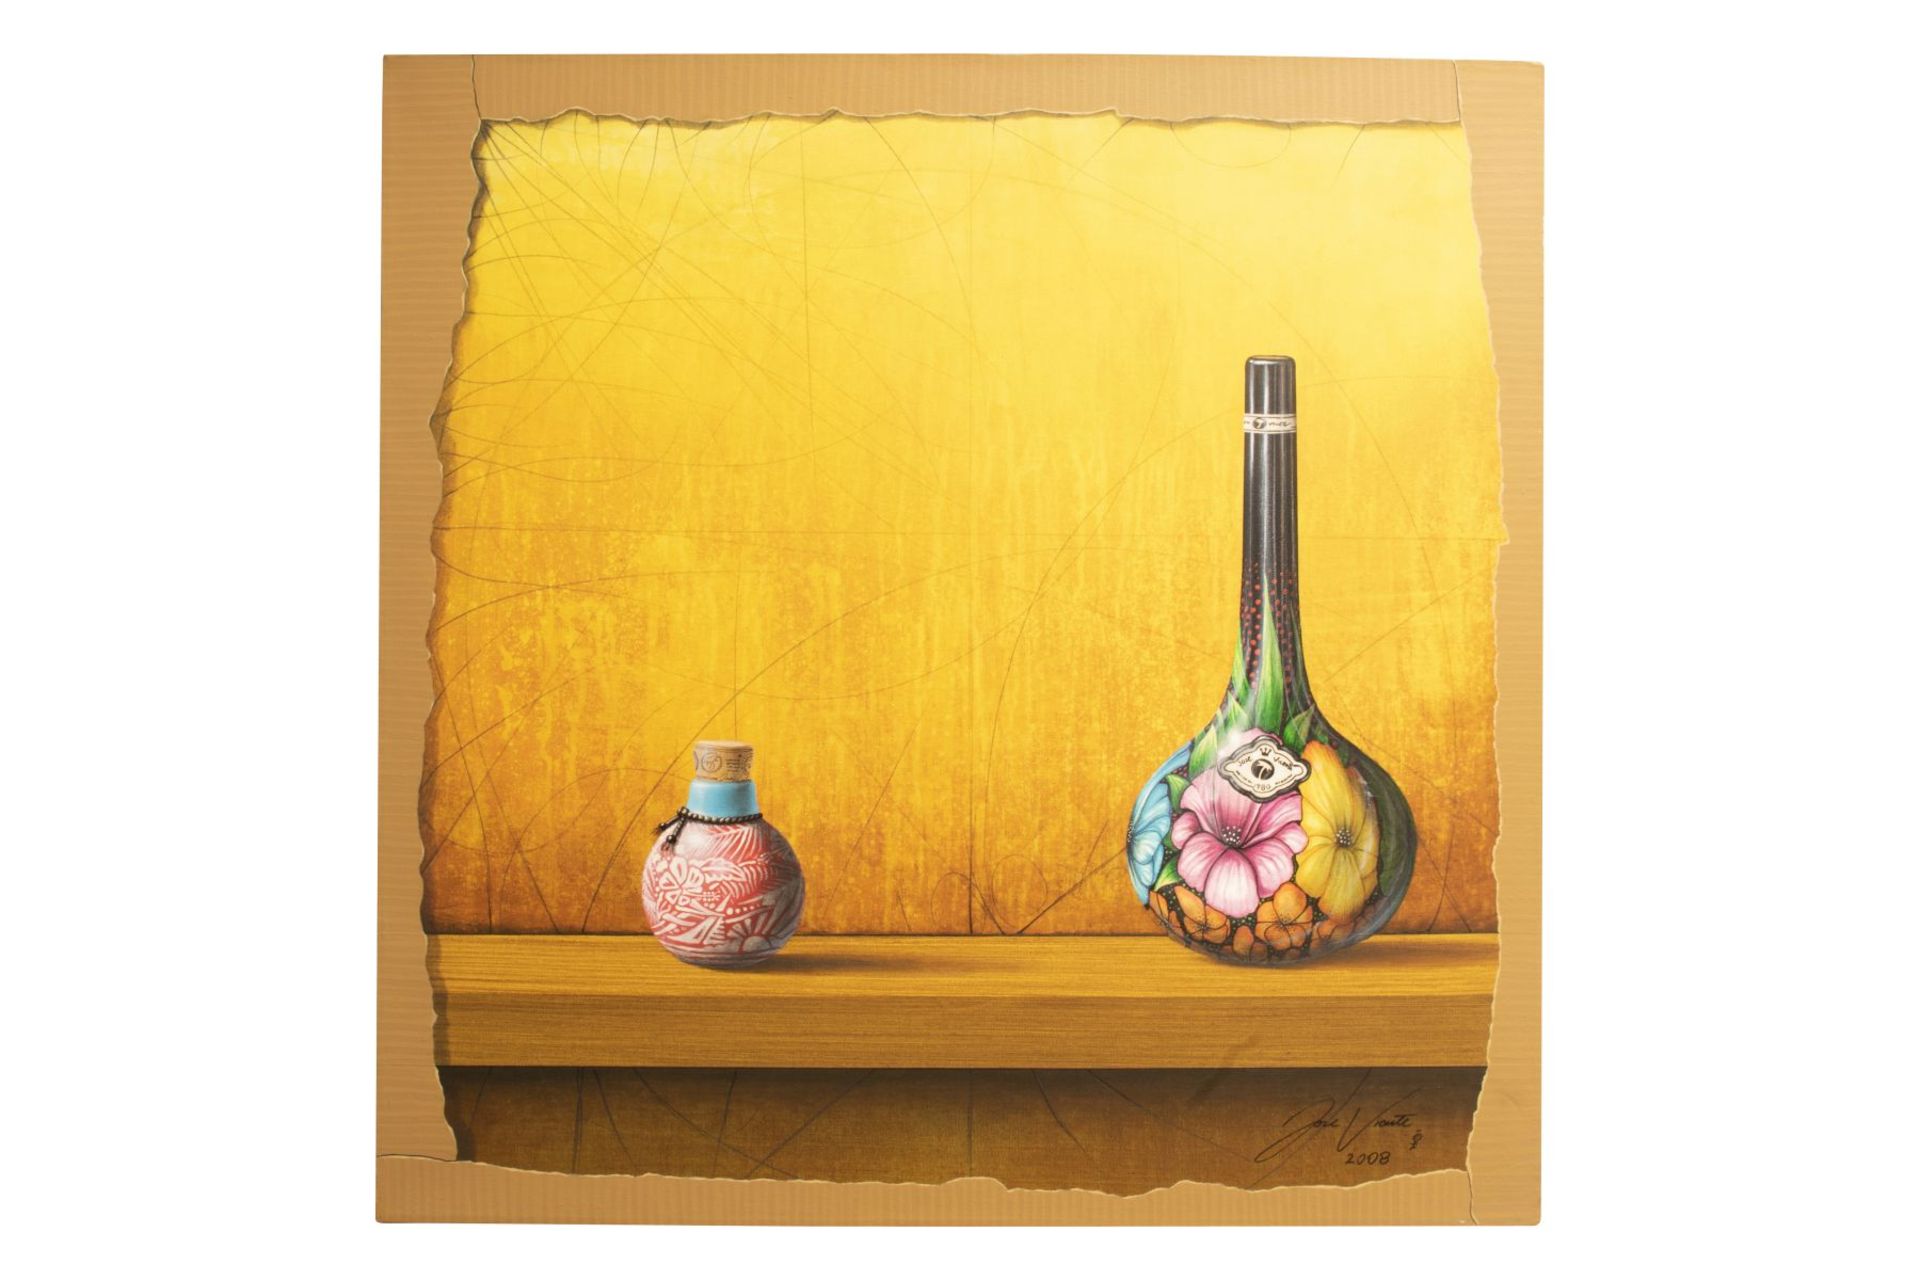 Jose Vicente (1977) "Painted wine bottle and small jar against colored background".